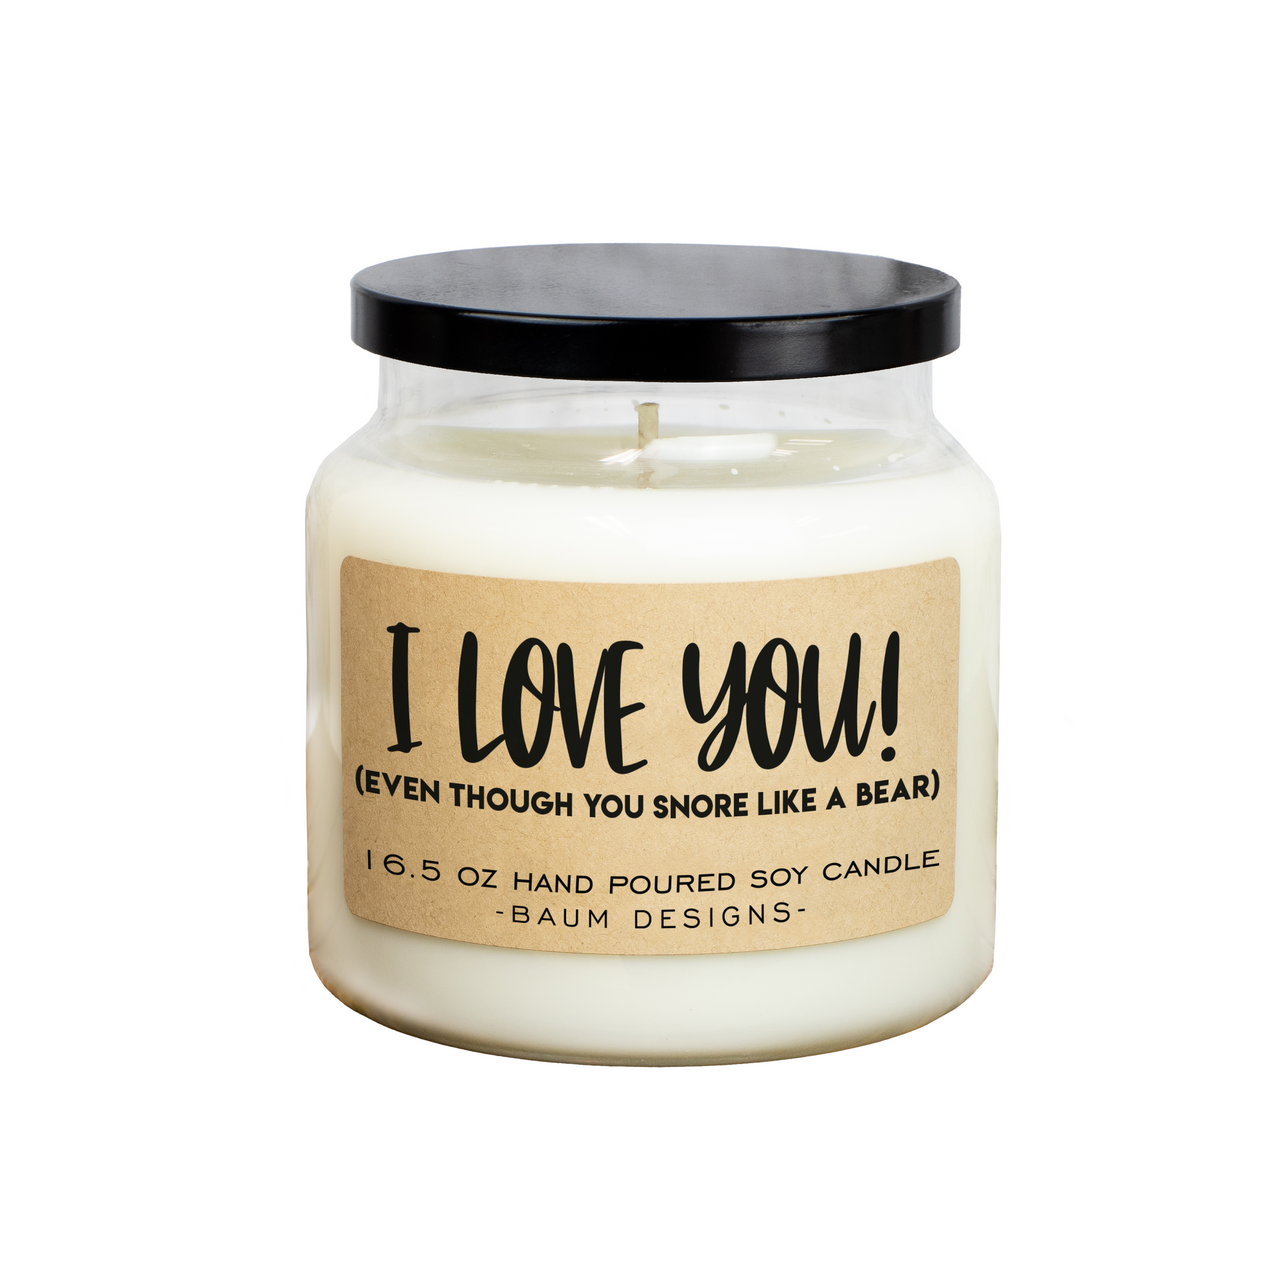 I Love You, Even Though You Snore Like A Bear Soy Candle